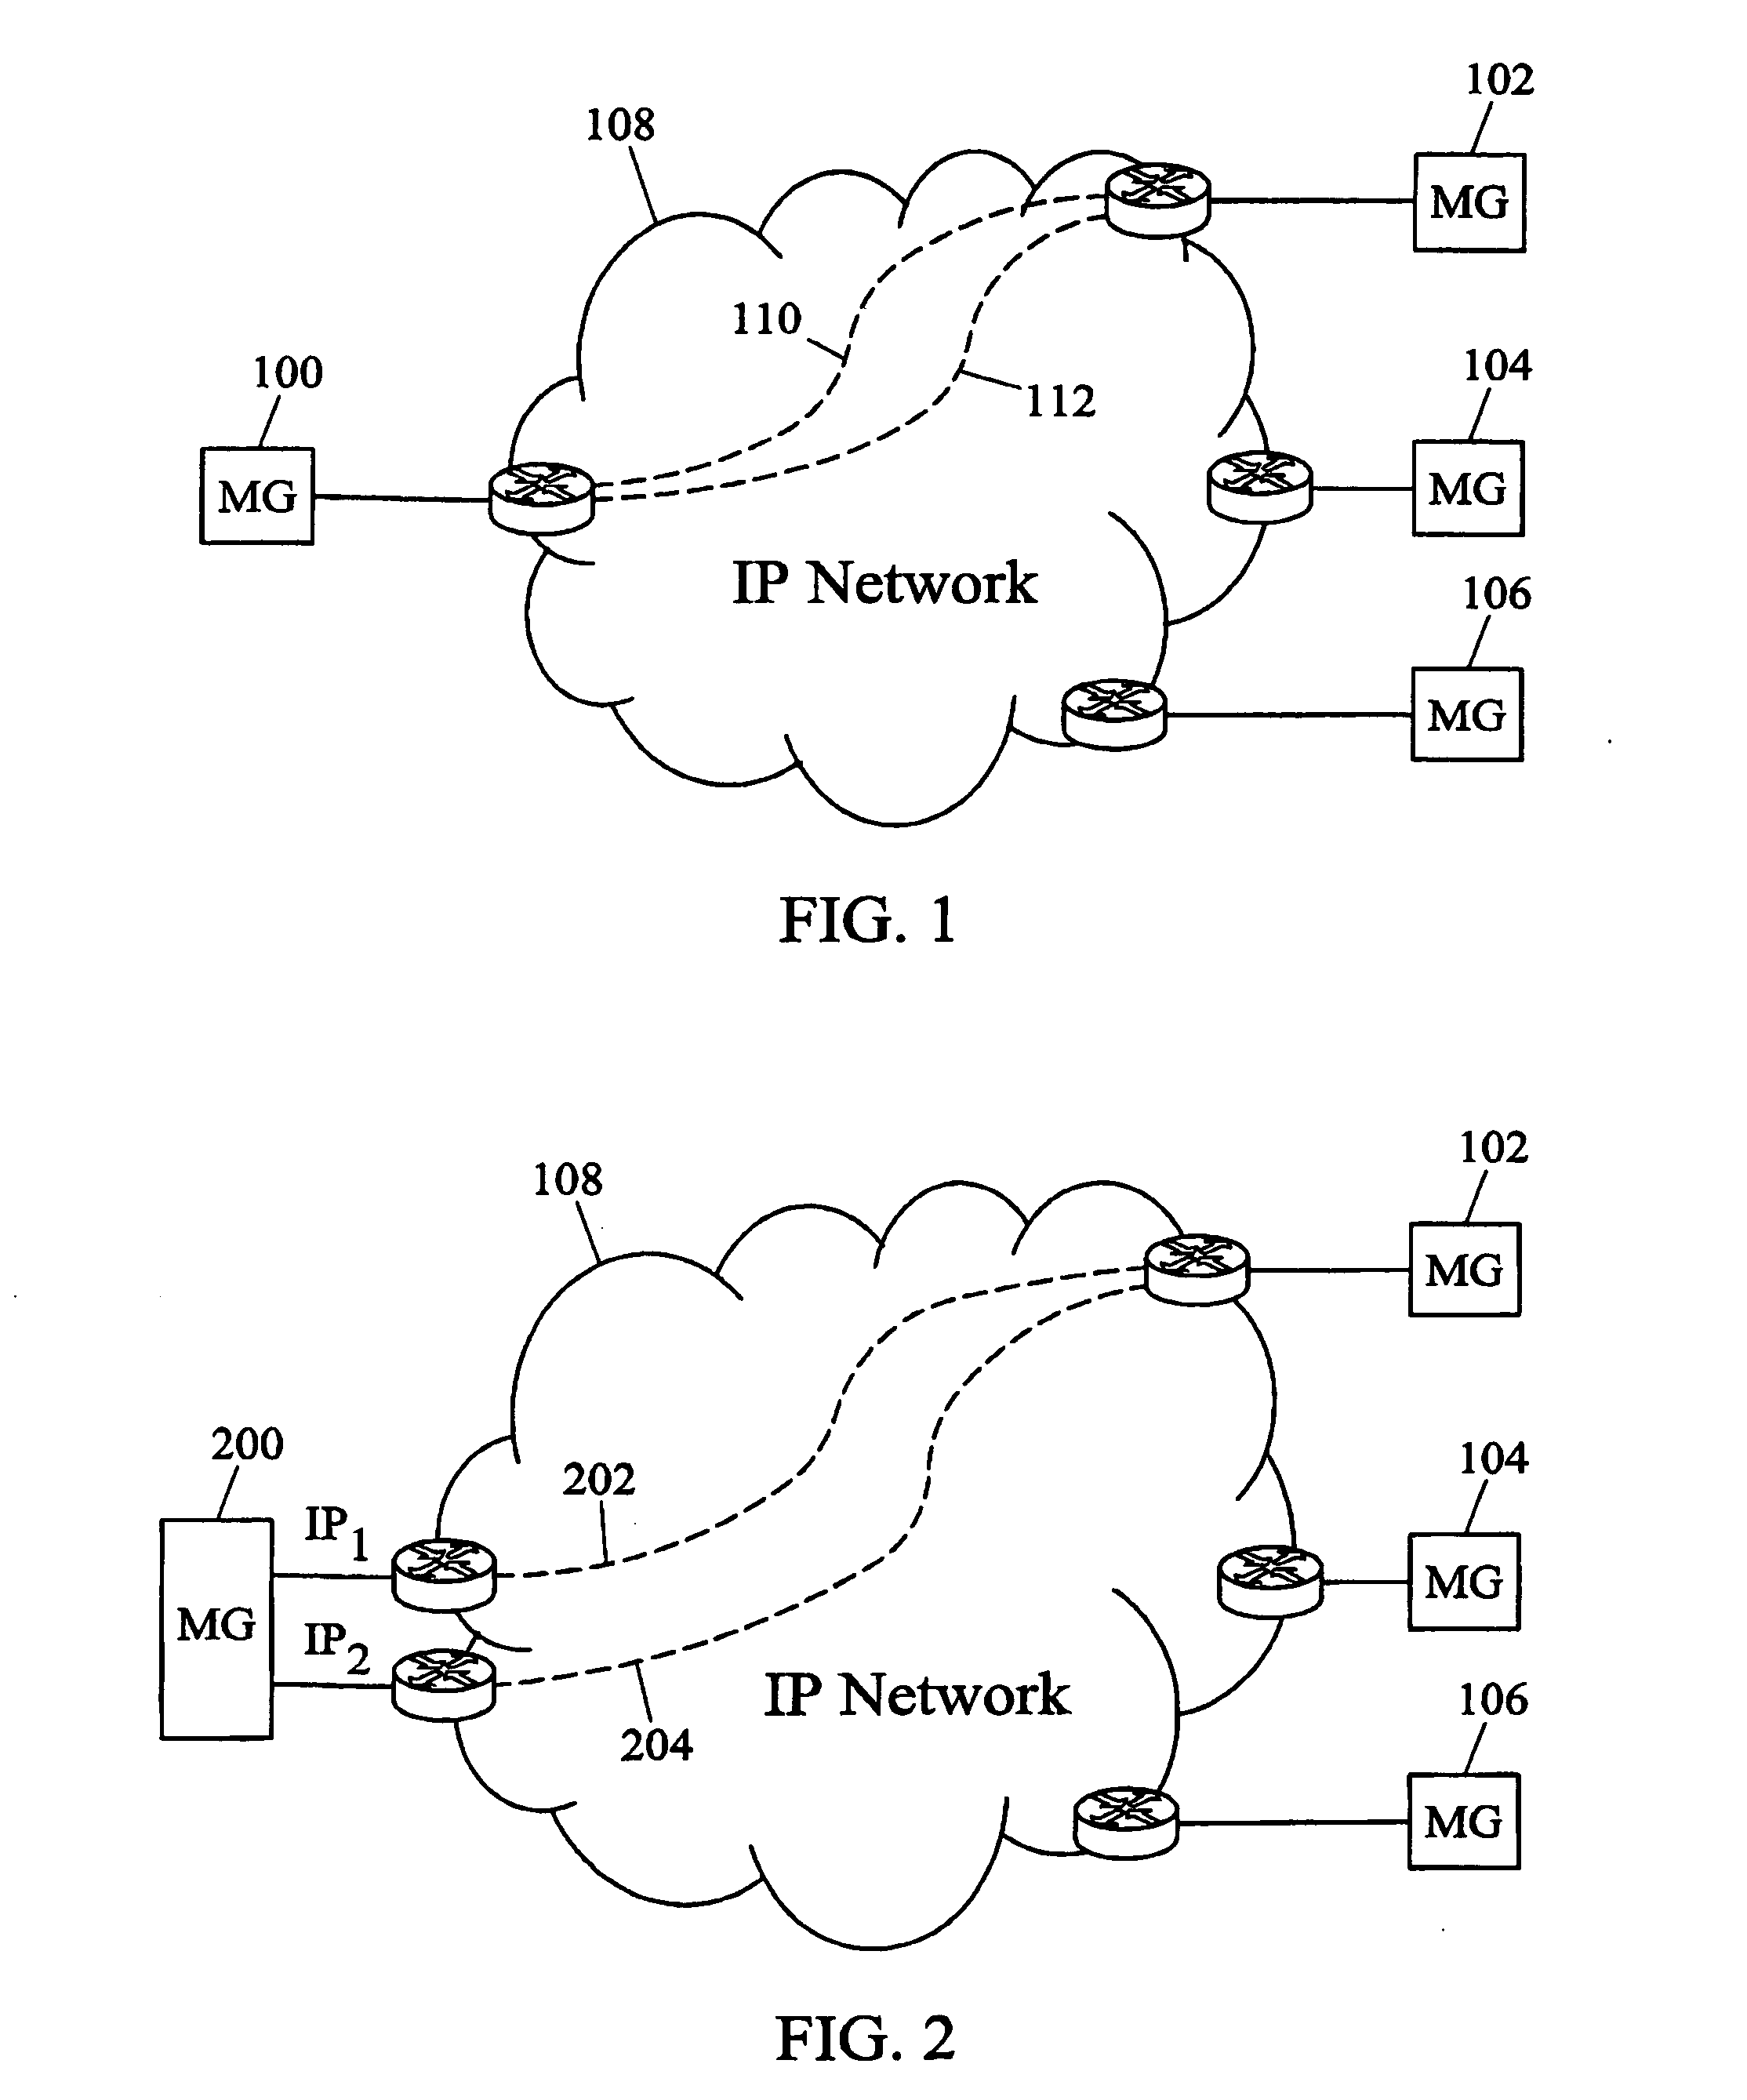 Methods, systems, and computer program products for voice over IP (VOIP) traffic engineering and path resilience using network-aware media gateway